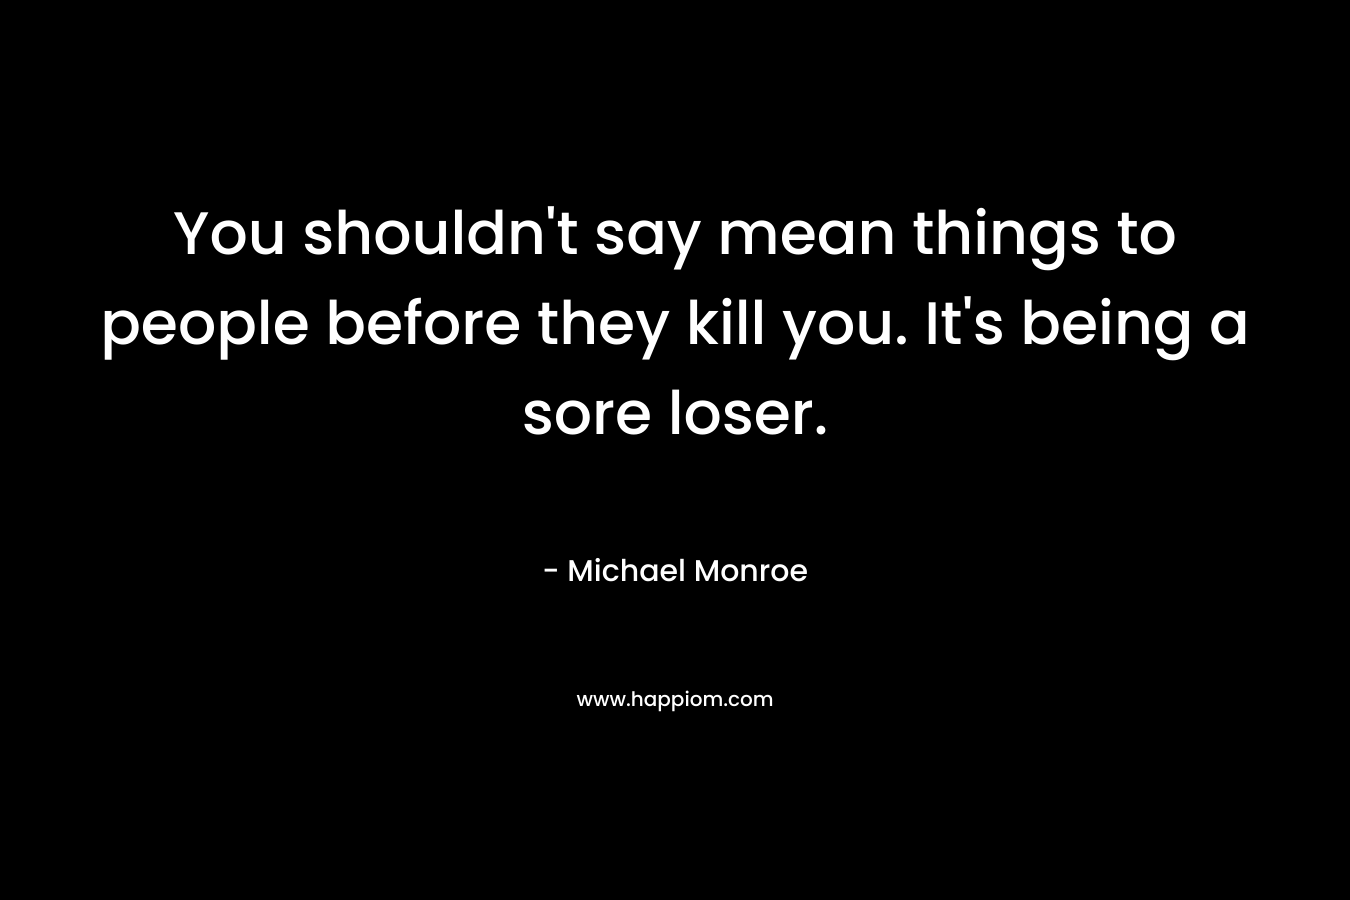 You shouldn't say mean things to people before they kill you. It's being a sore loser.